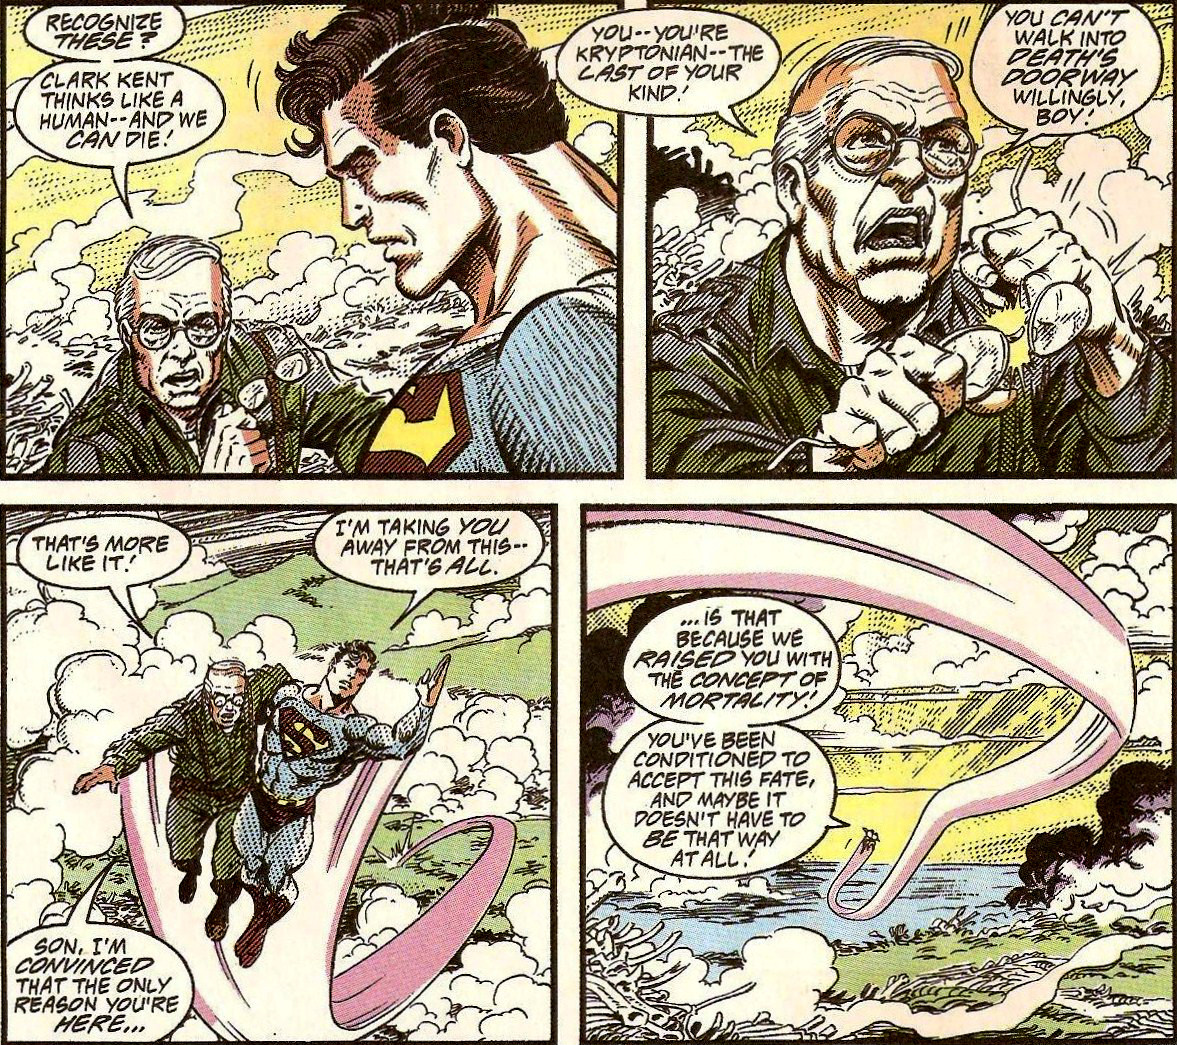 From Adventures of Superman #500 (1993)